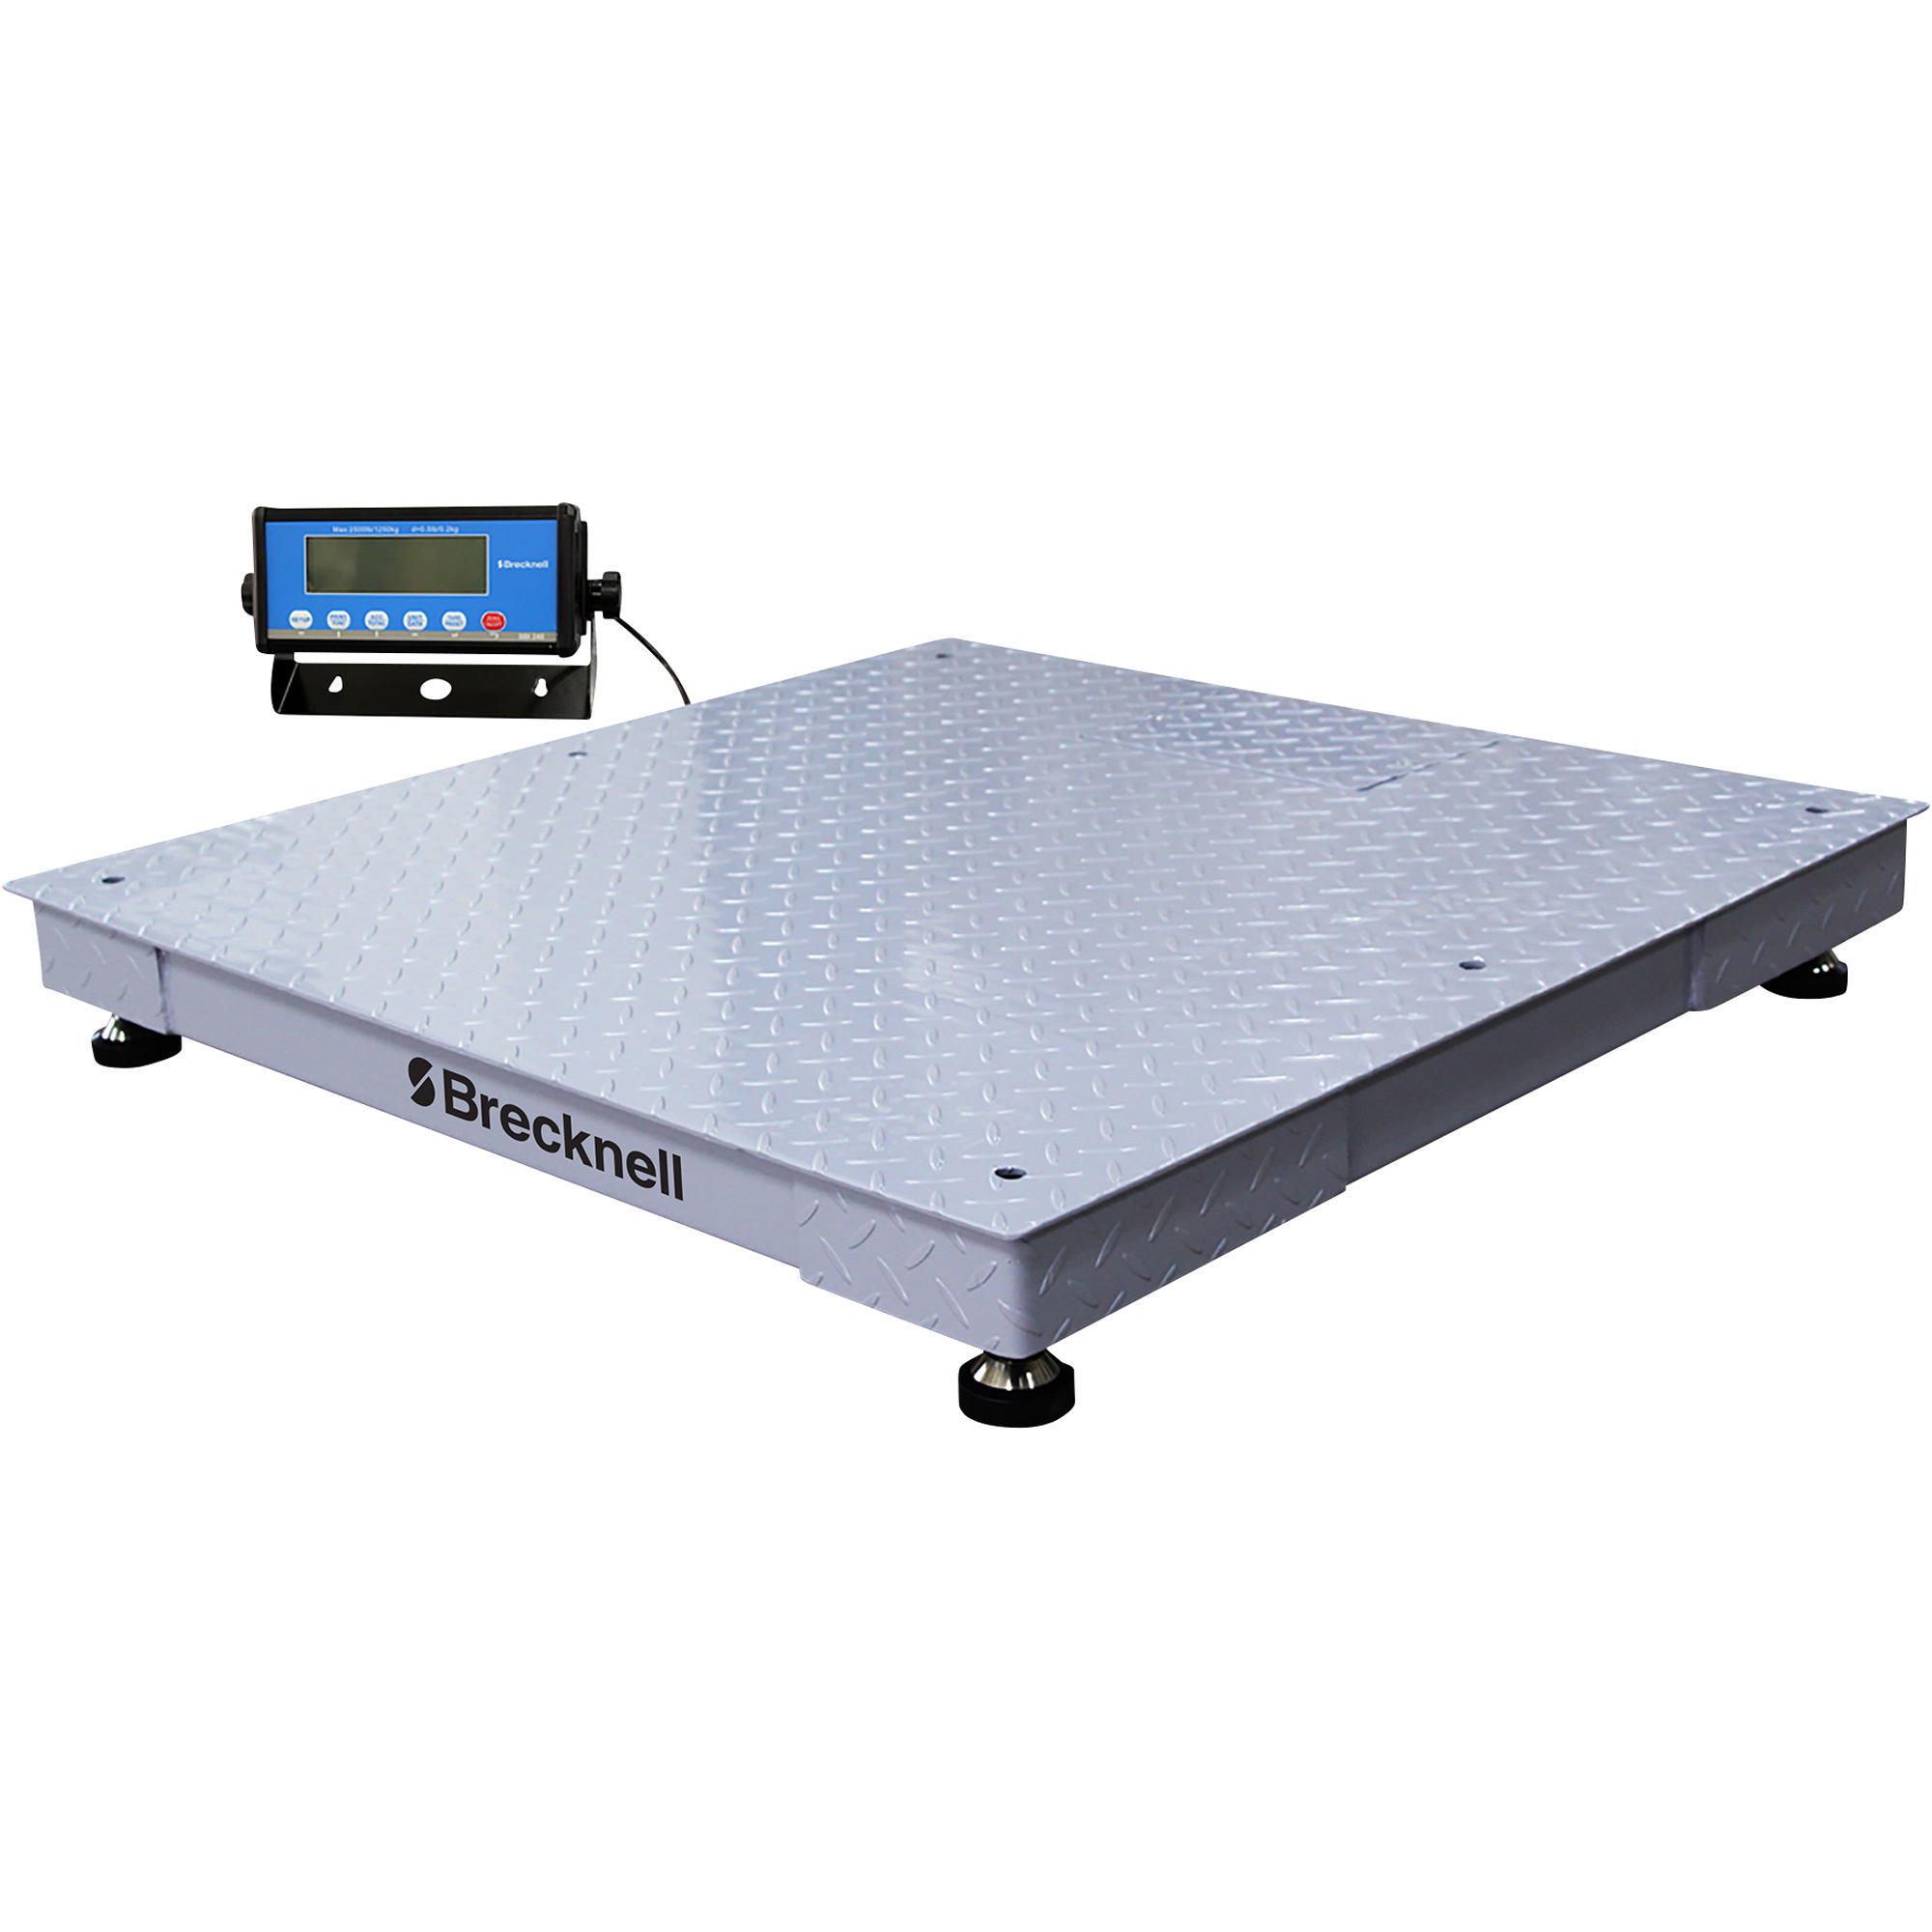 Brecknell Floor Scale with SBI240 LCD Indicator, 5000-Lb. Capacity, 59Inch x 59Inch Deck, Model 810036380072